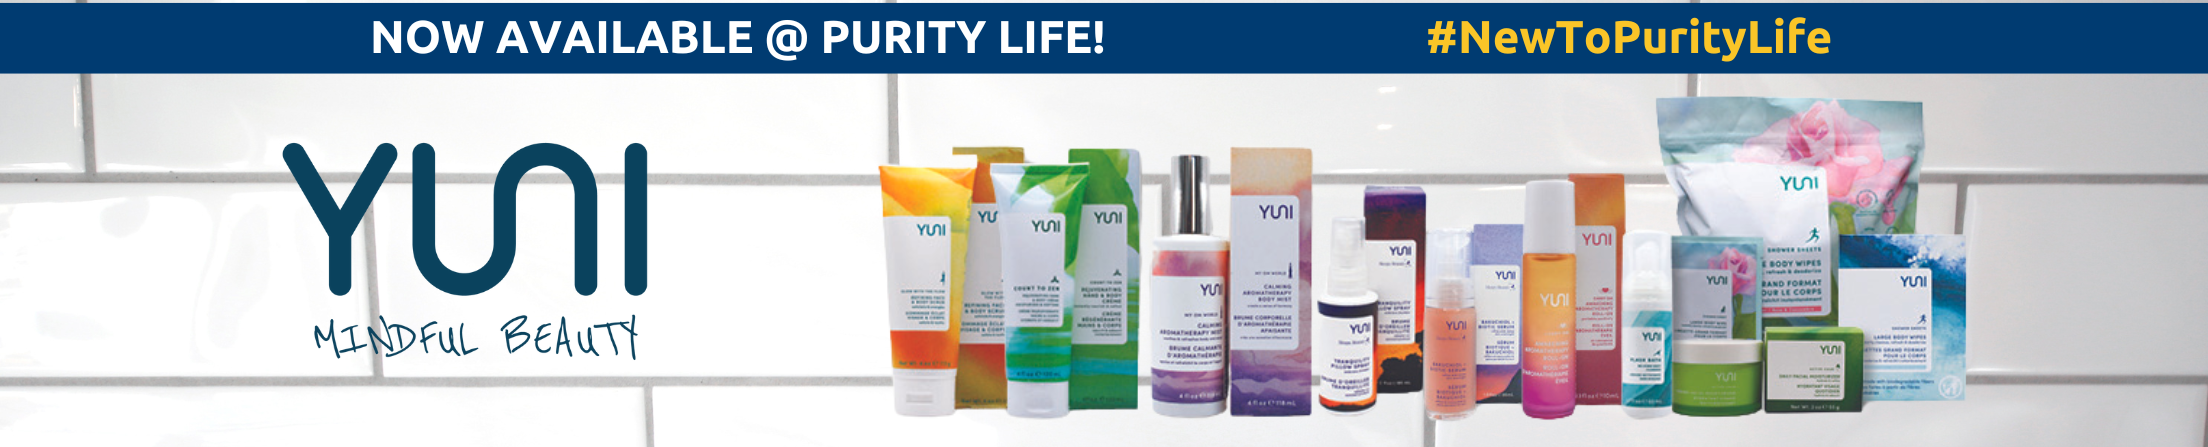 Yuni Beauty NOW AVAILABLE @ PURITY LIFE!